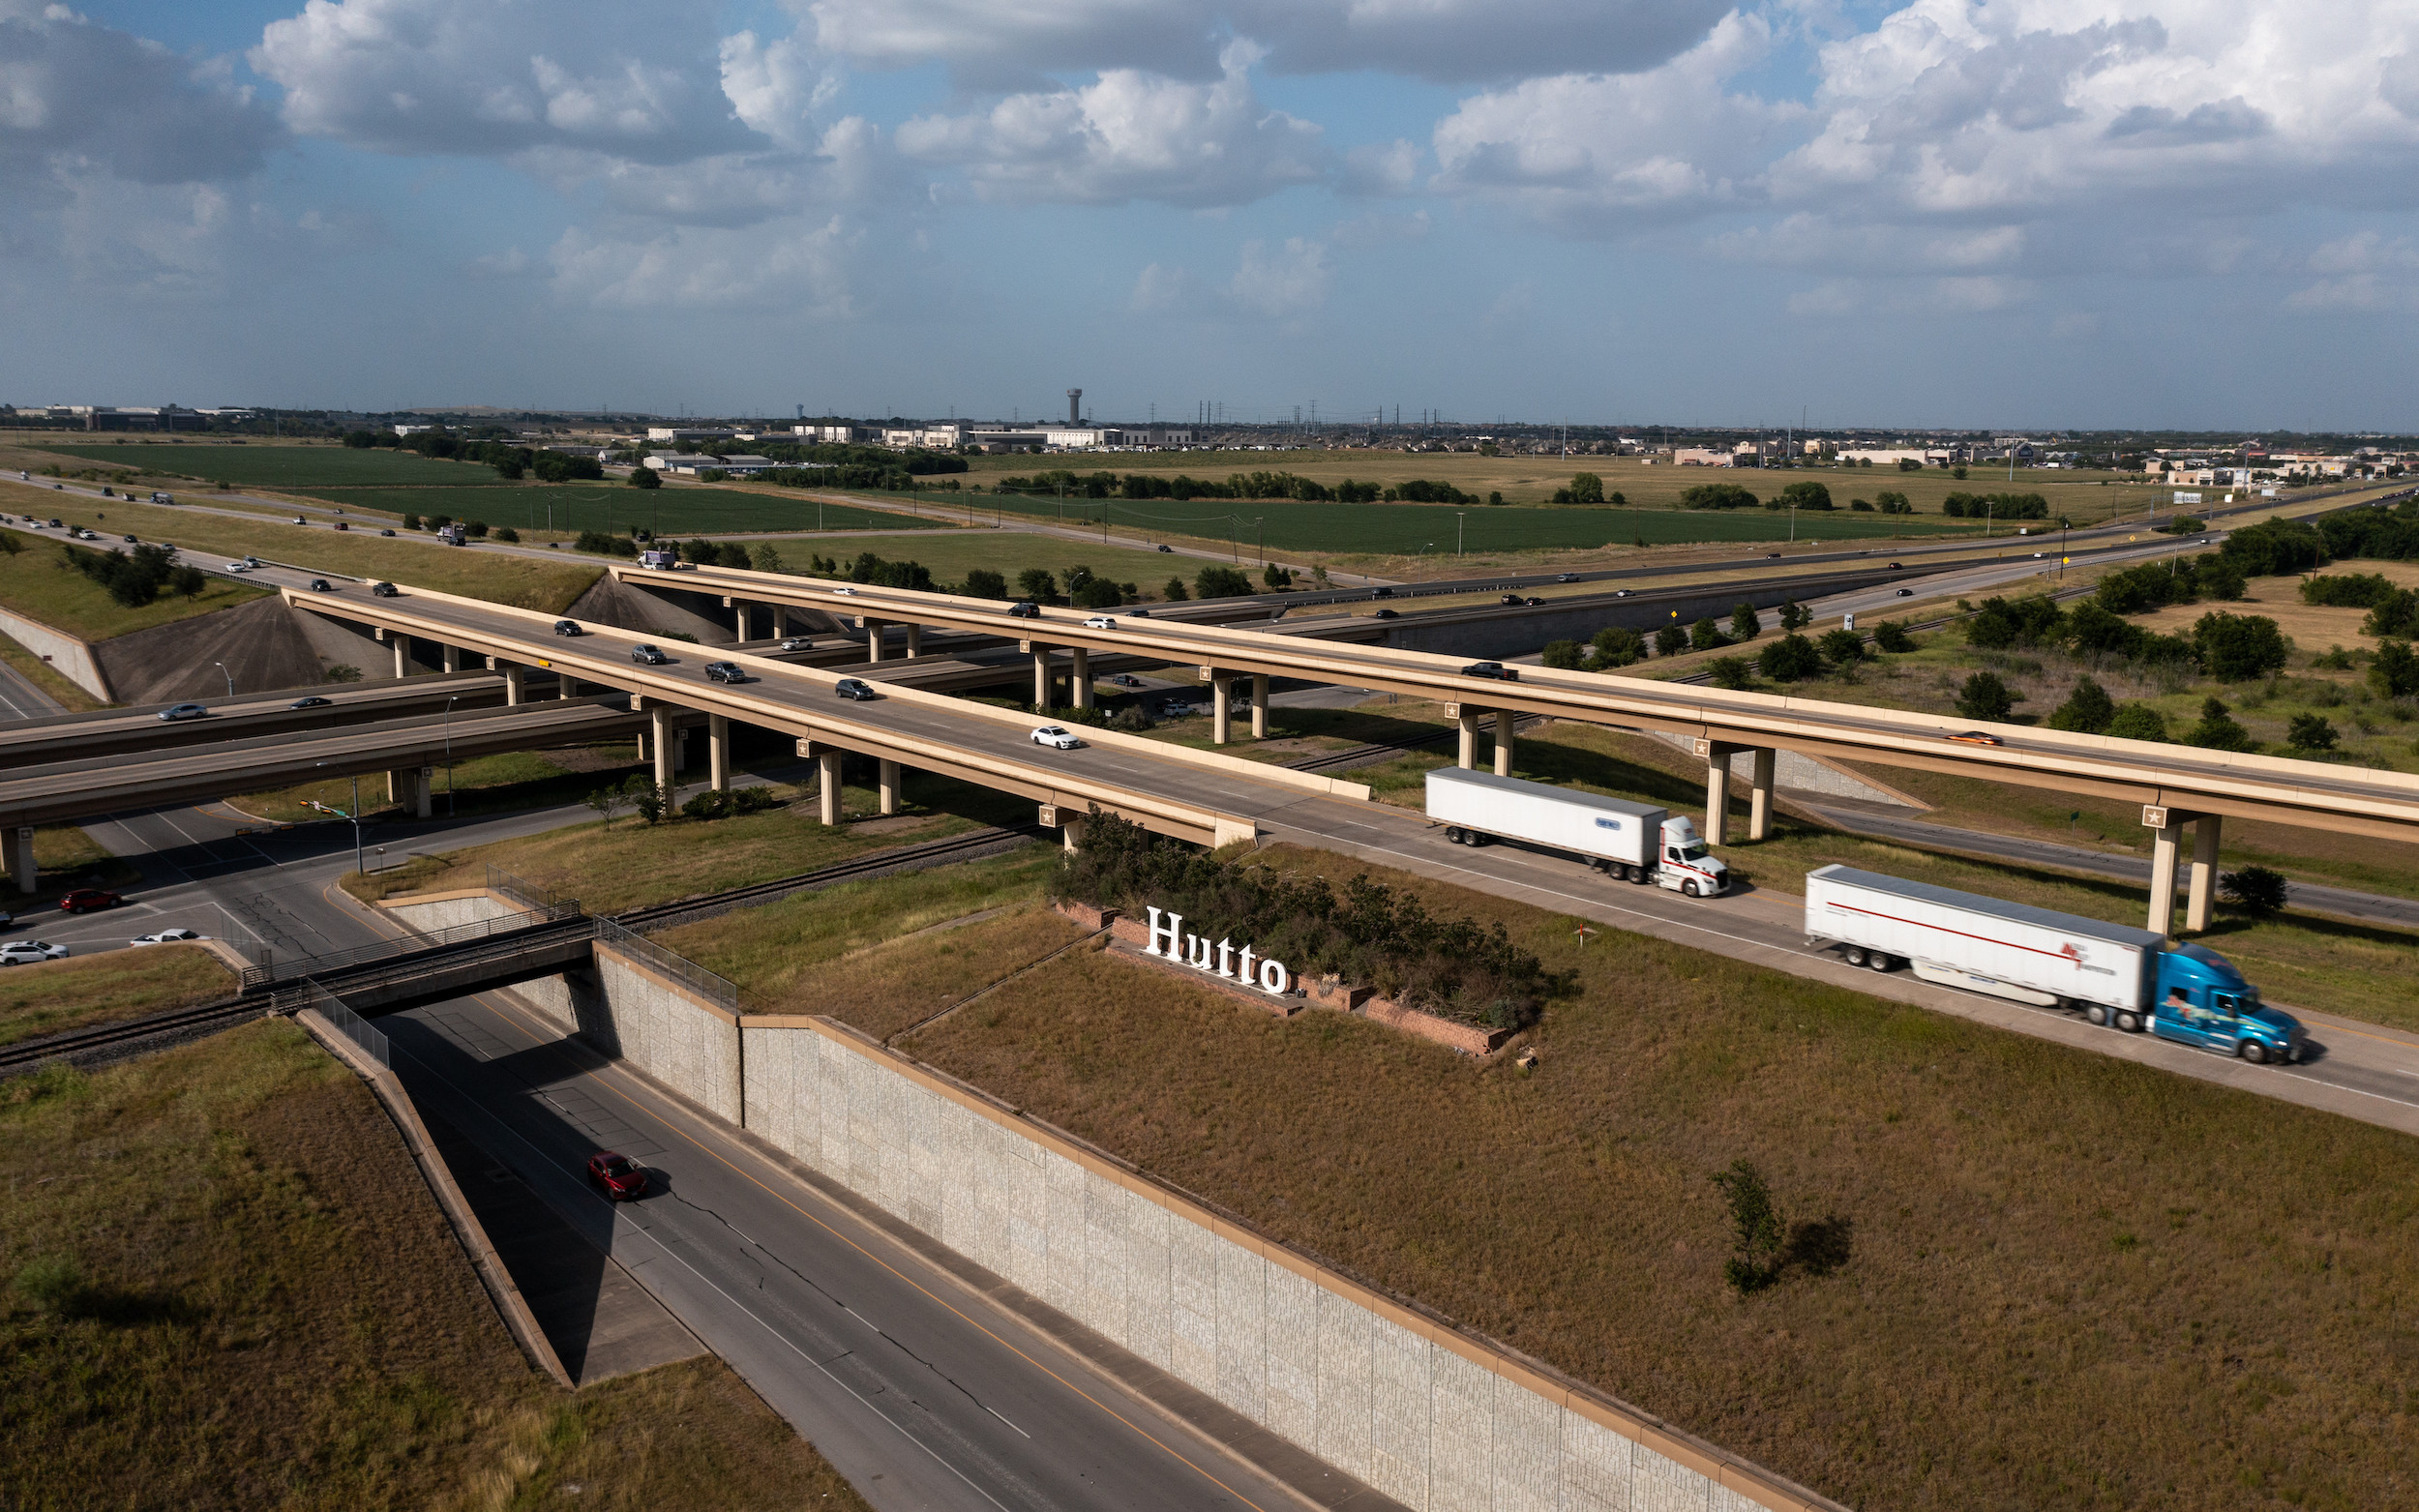 photo of vehicles on a highway with the hutto sign in the foreground